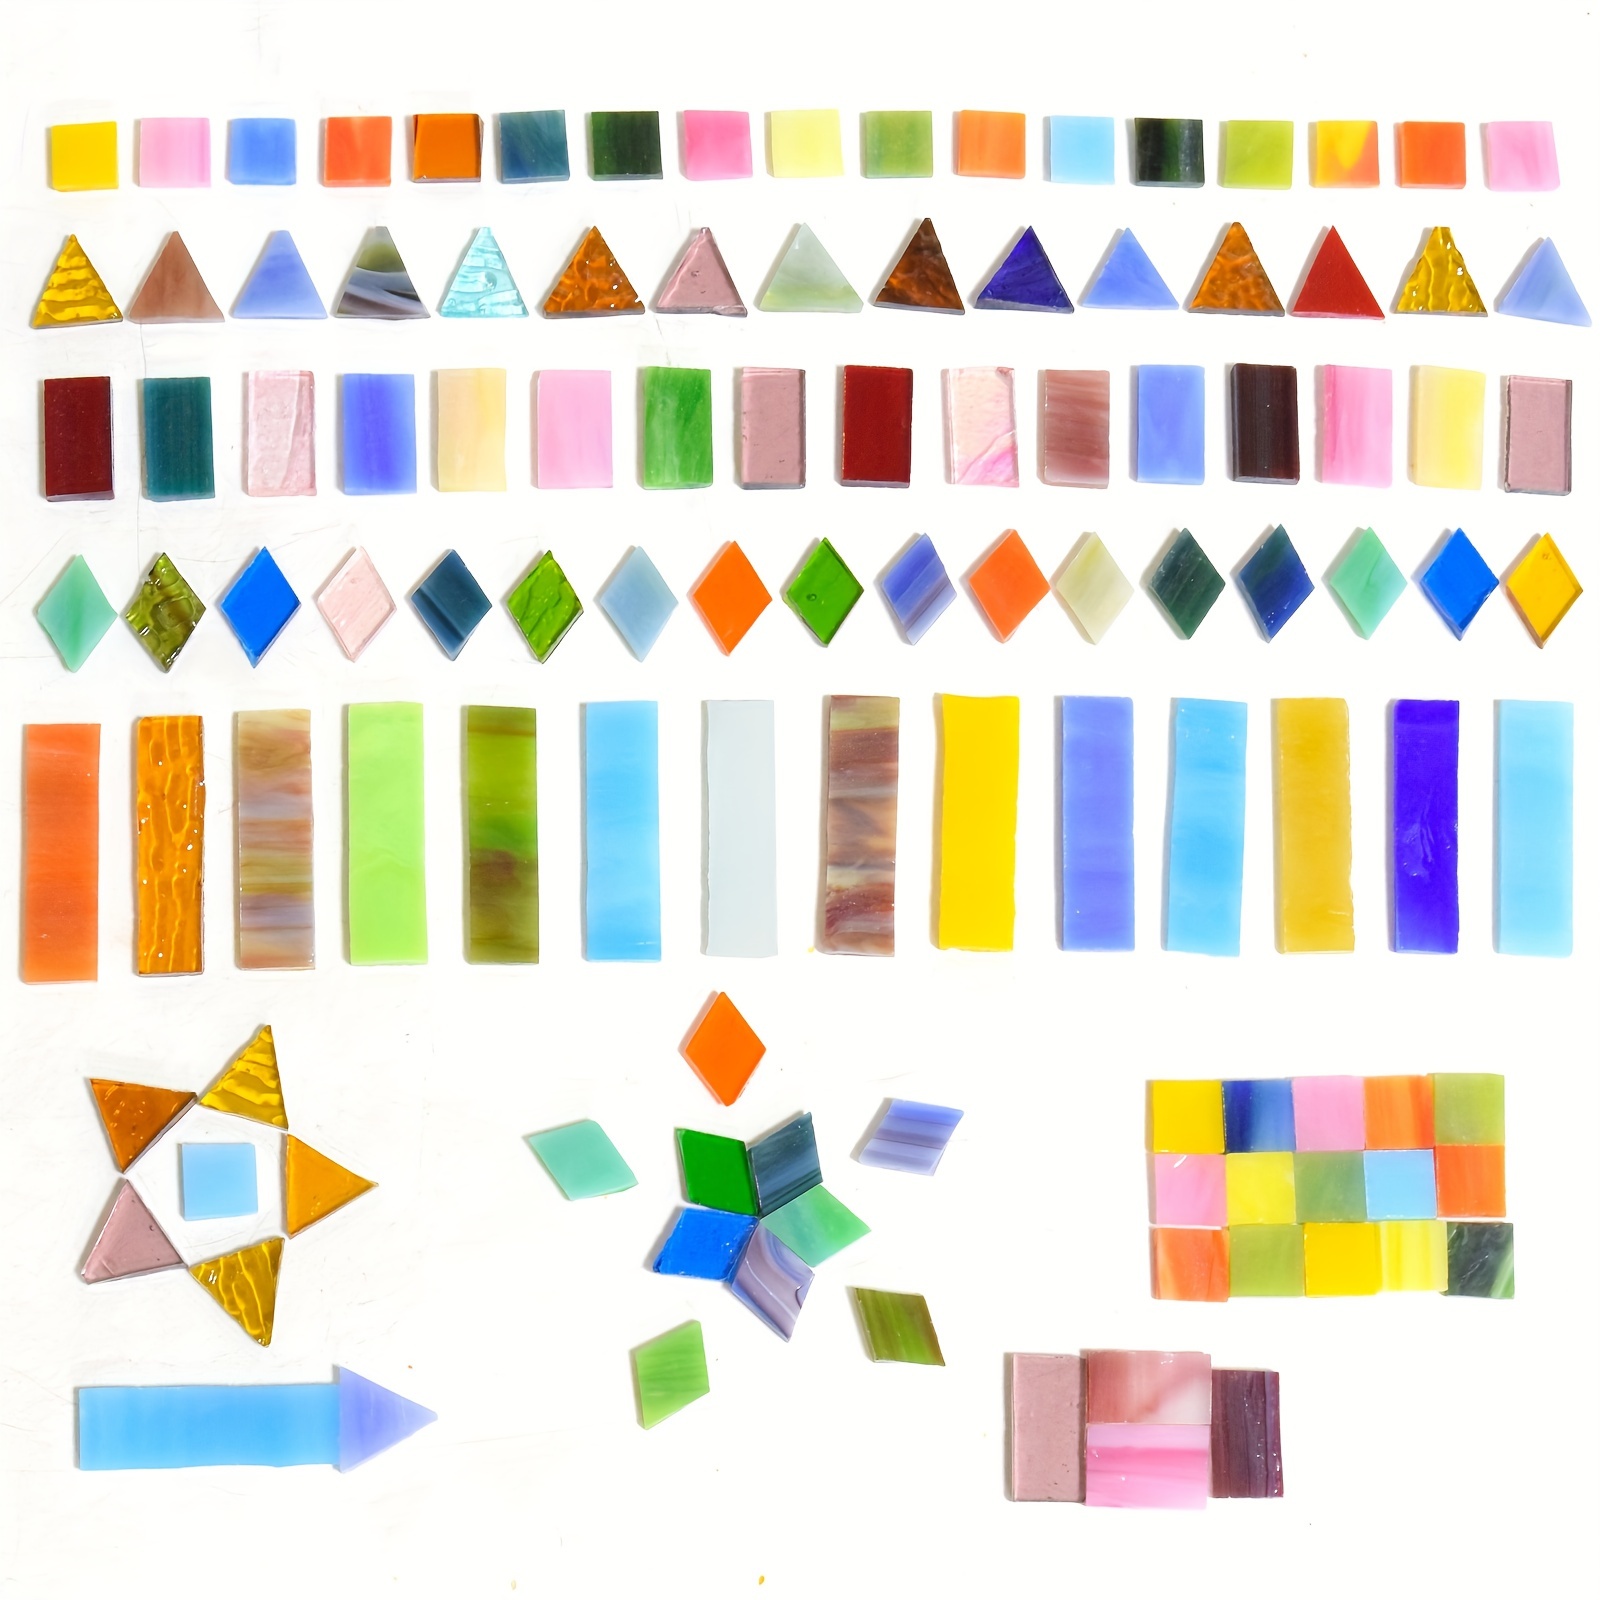 Irregular Mosaic Glass Pieces 500g for , Crushed Stained Glass Tiles,  Assorted Colors and Shapes Mosaic Art Supplies (Mixed Assorted Colors)